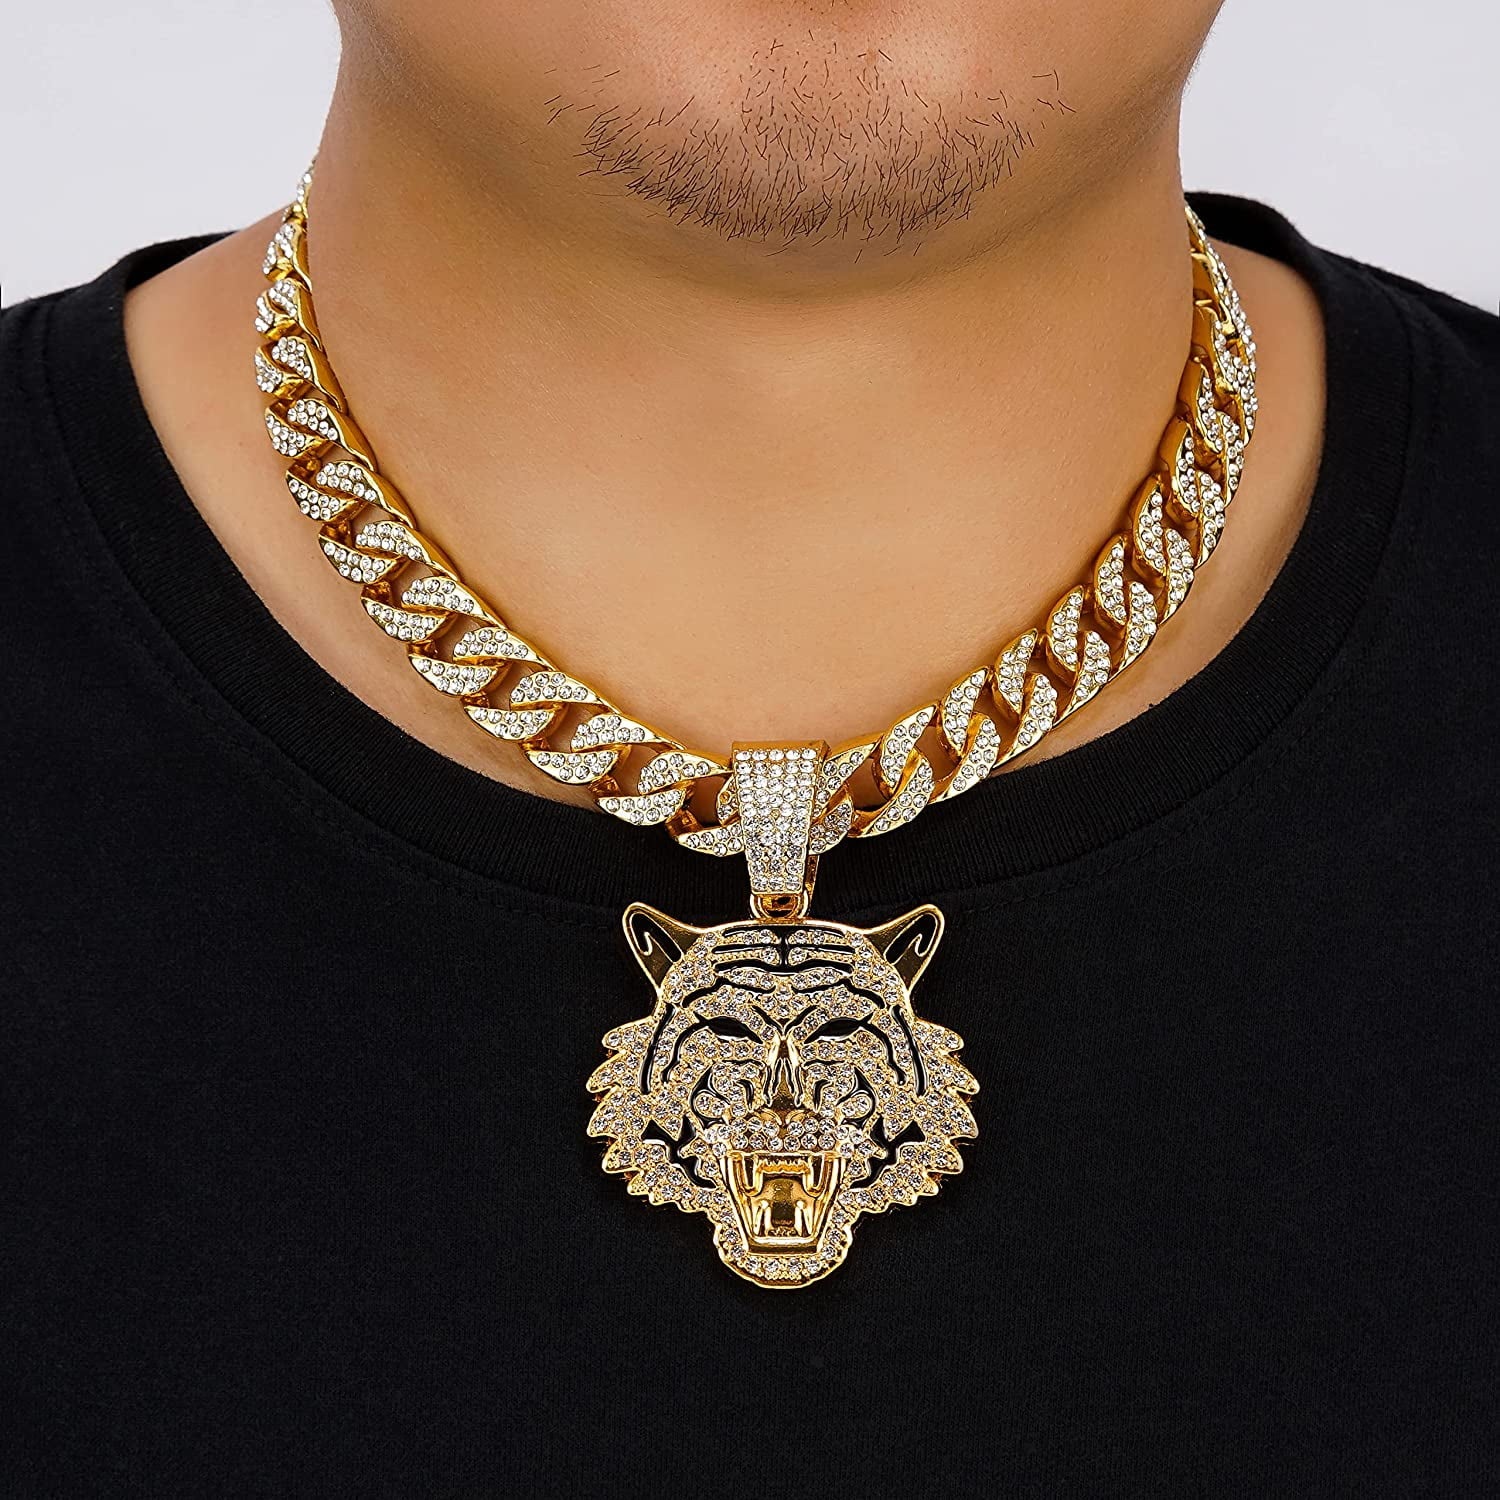 Buy KRYSTALZ Men Mc Stan Hindi Pendant Cuban Link Necklace Iced Out 13MM  Bling Diamond Chain Miami Hip Hop Jewelry (Gold) at